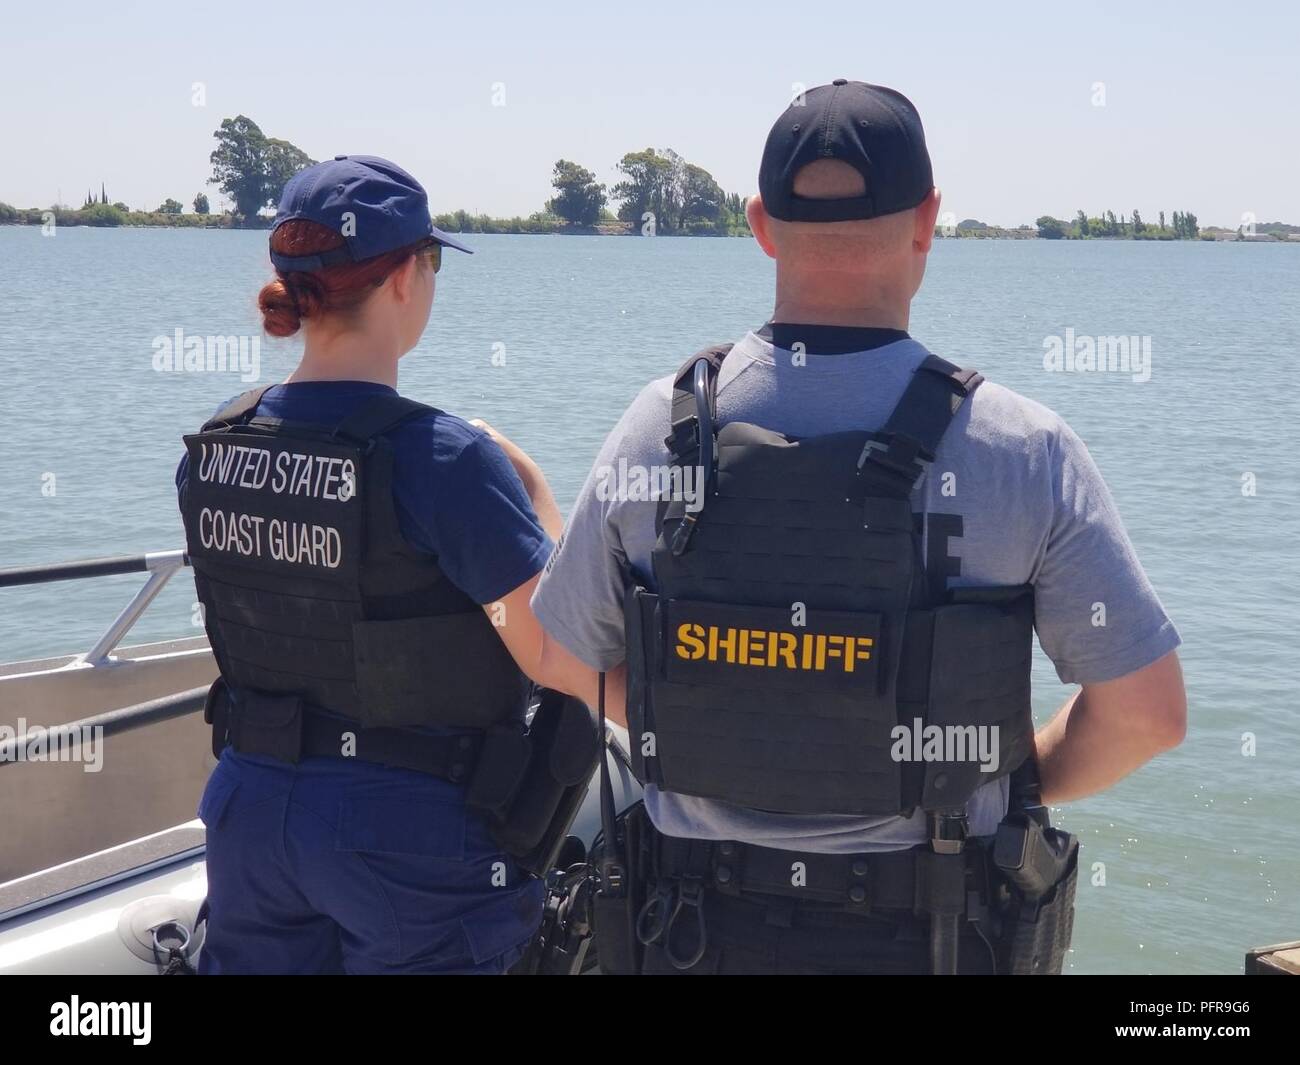 Petty Officer 3rd Class Iris Bahr of Coast Guard Station Rio Vista and Mike Keegan of the Sacramento County Sheriff’s Marine Unit watch over the Delta Waterway in Rio Vista, California, May 22, 2018 during National Safe Boating Week.  The Coast Guard works closely with local law enforcement agencies to collaboratively patrol waterways and promote boating safety.  (Coast Guard Stock Photo